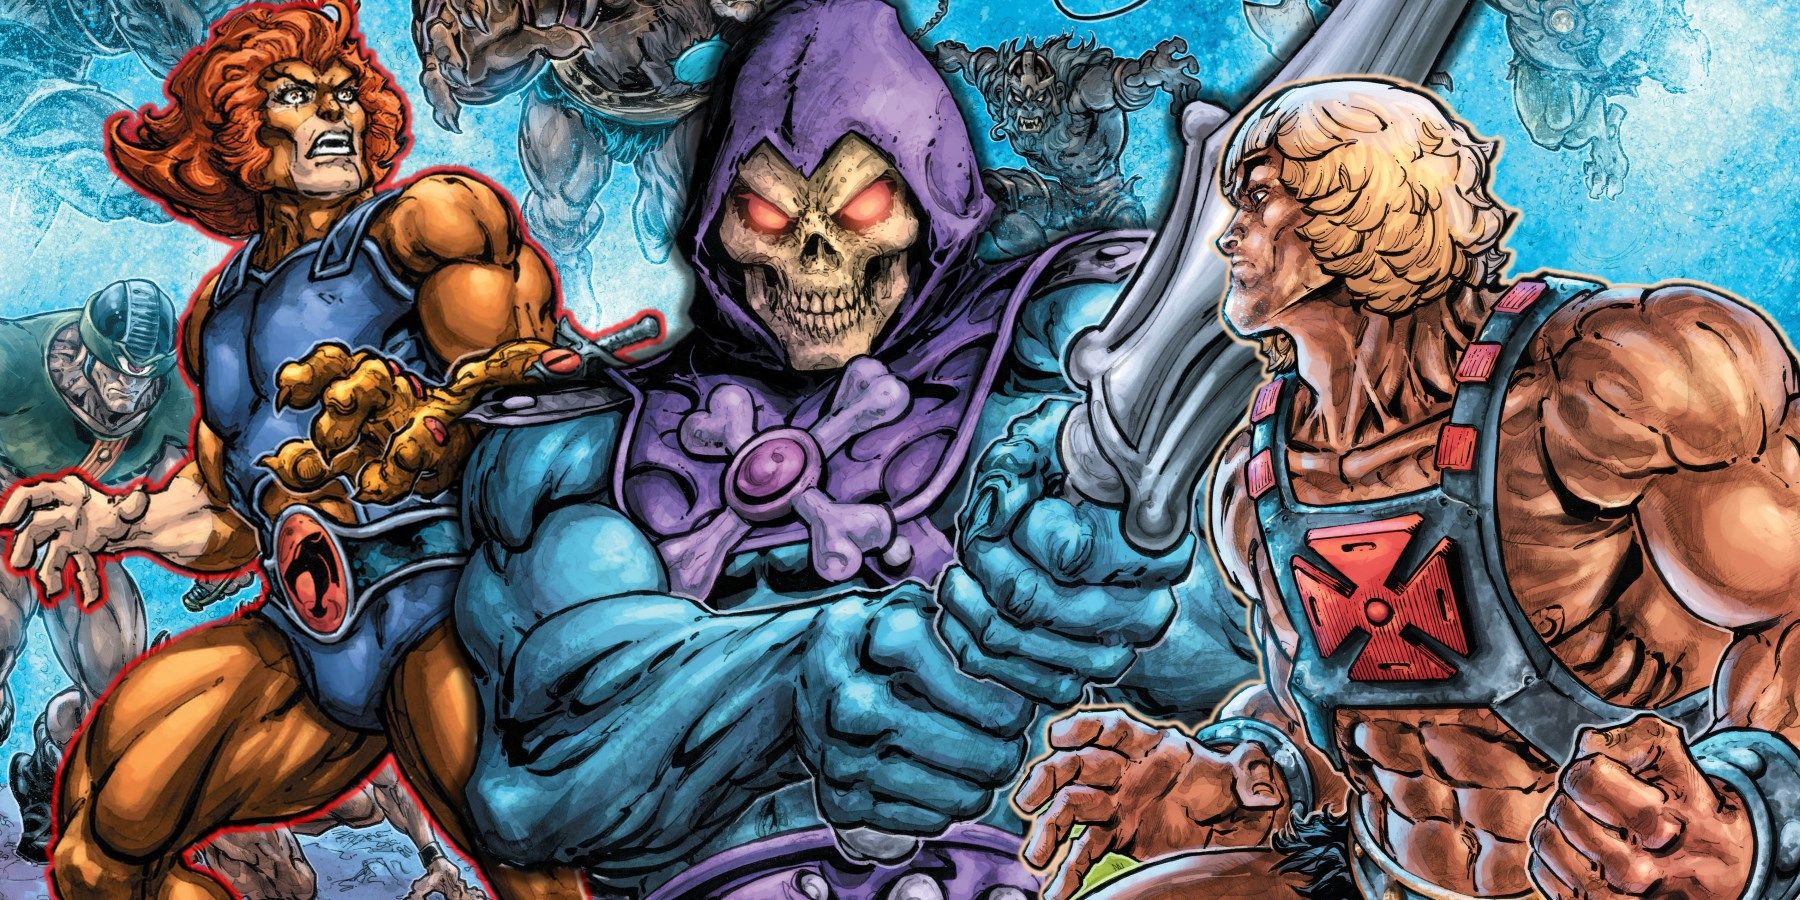 Brilliant He-Man Vs Thundercats Crossover - Explored - One Of Most